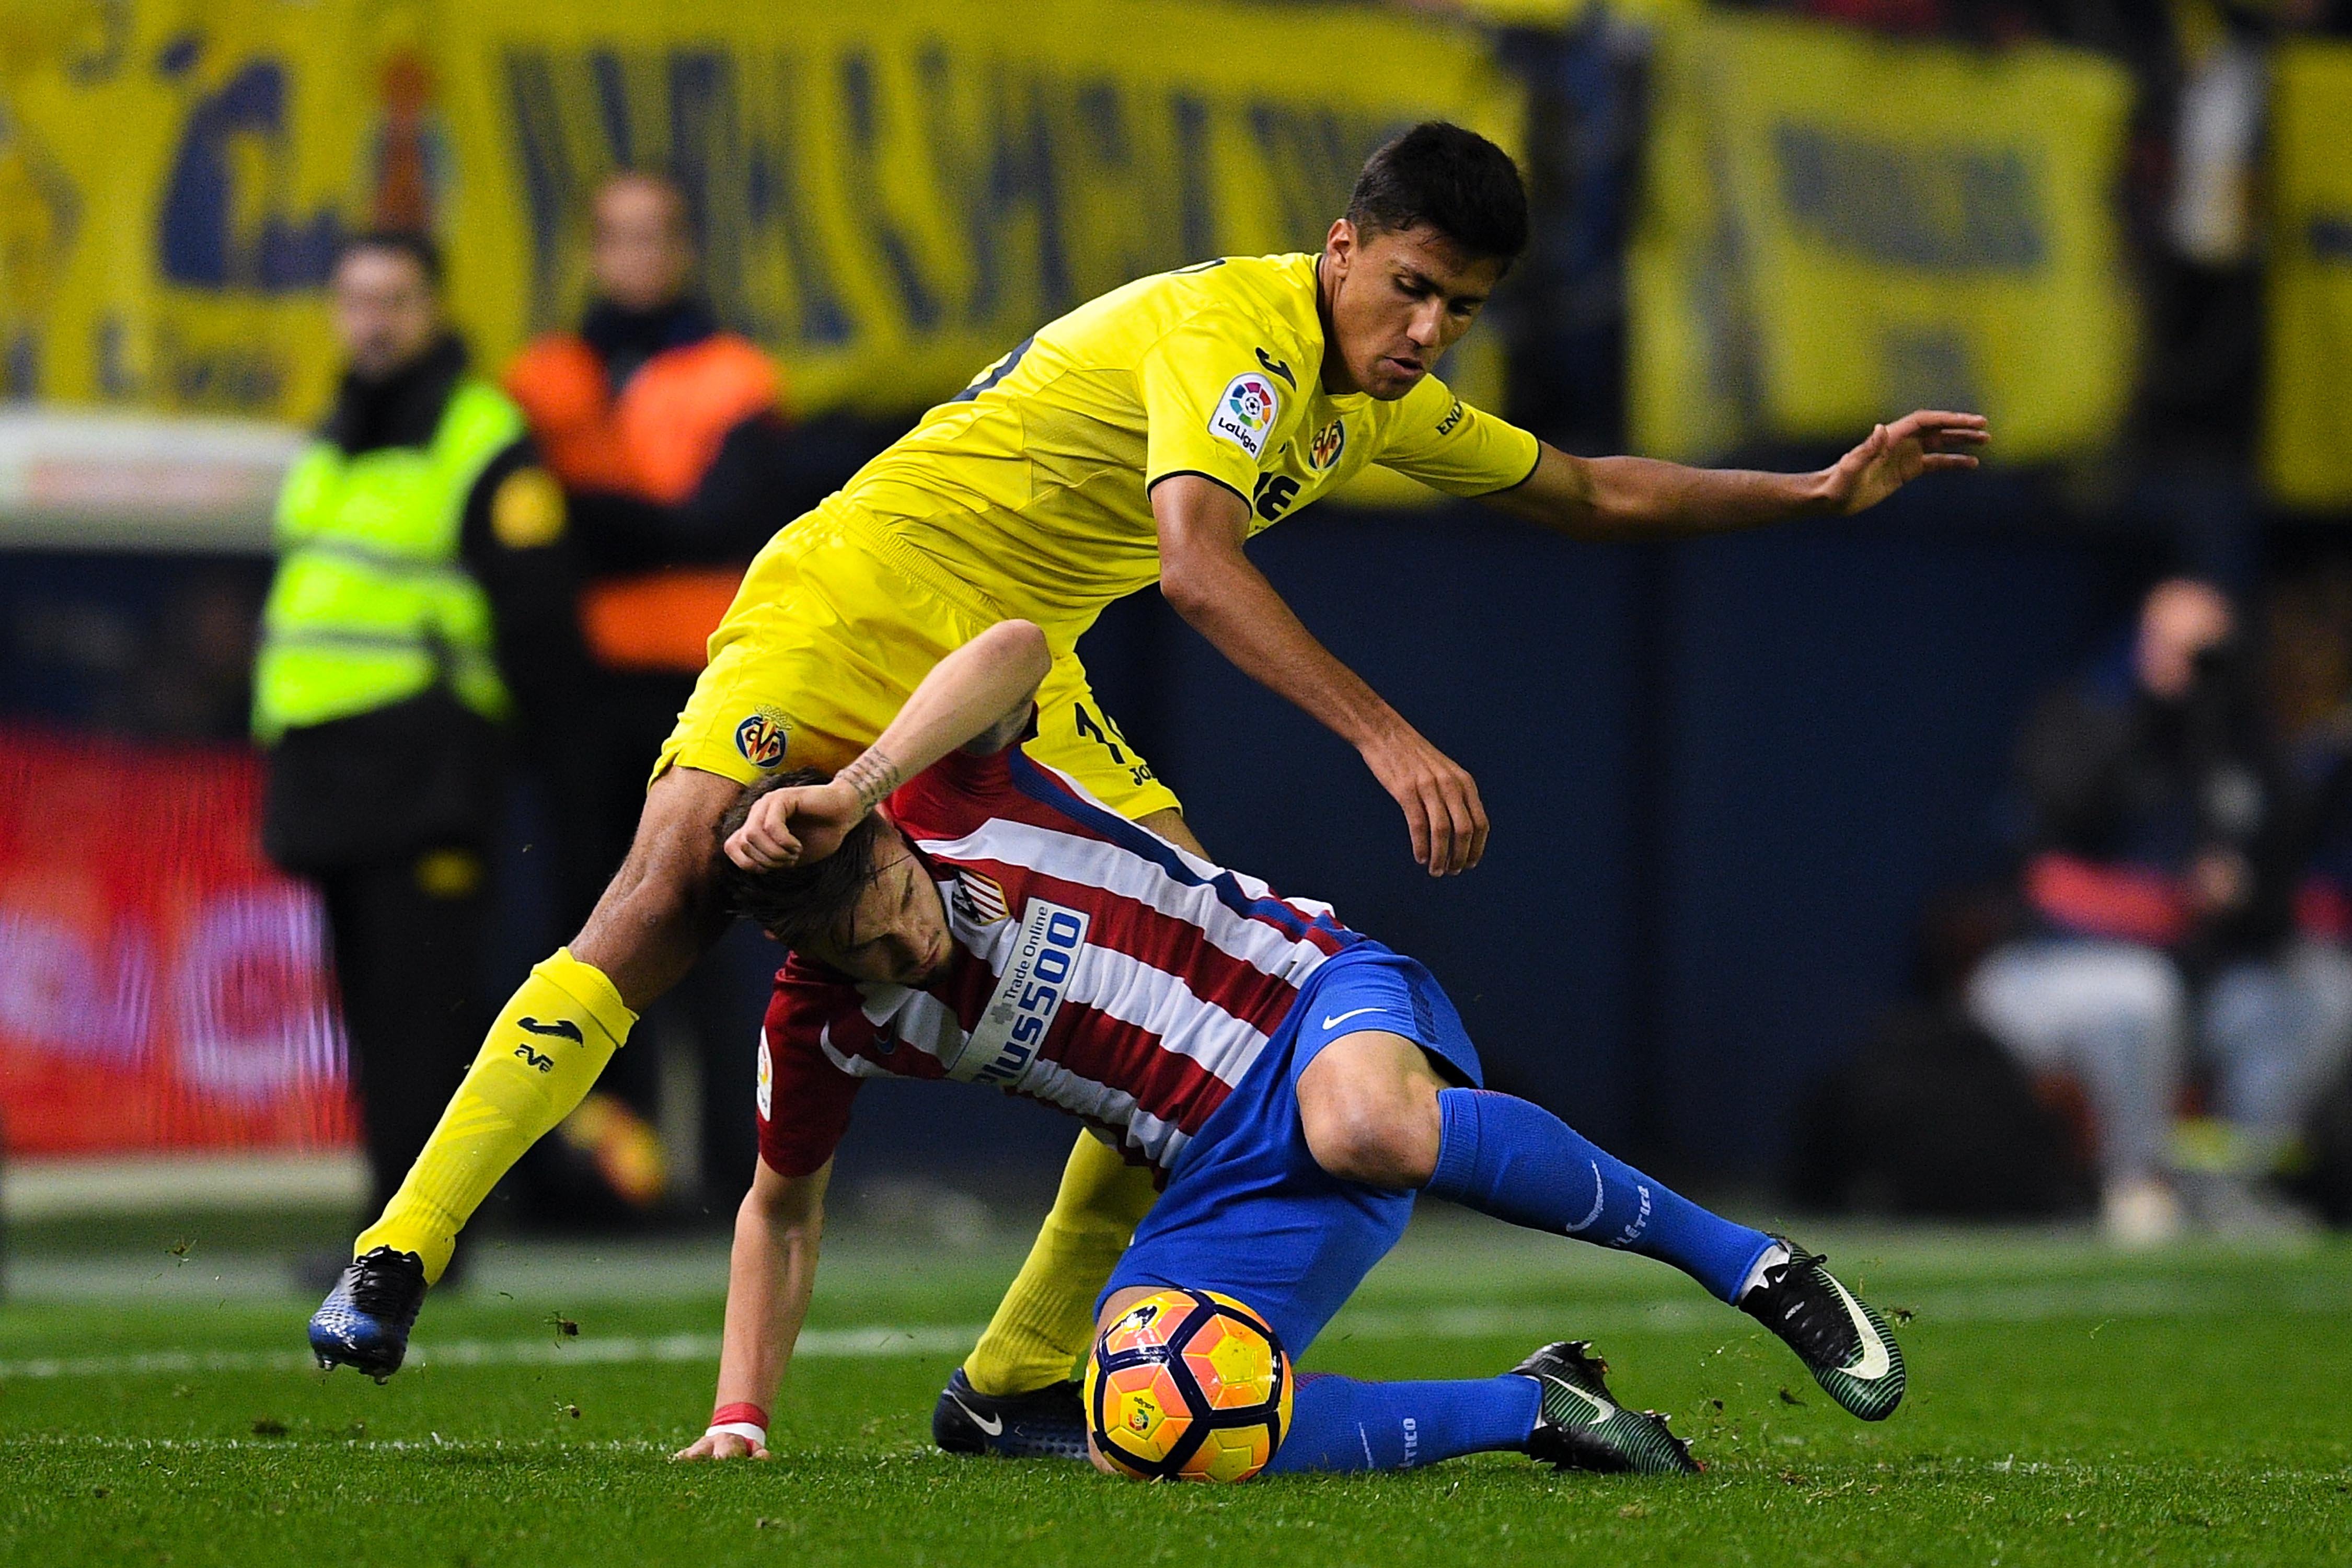 VILLARREAL, SPAIN - DECEMBER 12:  Saul Niguez of Club Atletico de Madrid competes for the ball with Rodri Hernandez of Villarreal CF during the La Liga match between Villarreal CF and Club Atletico de Madrid at El Madrigal stadium on December 12, 2016 in Villarreal, Spain.  (Photo by David Ramos/Getty Images)